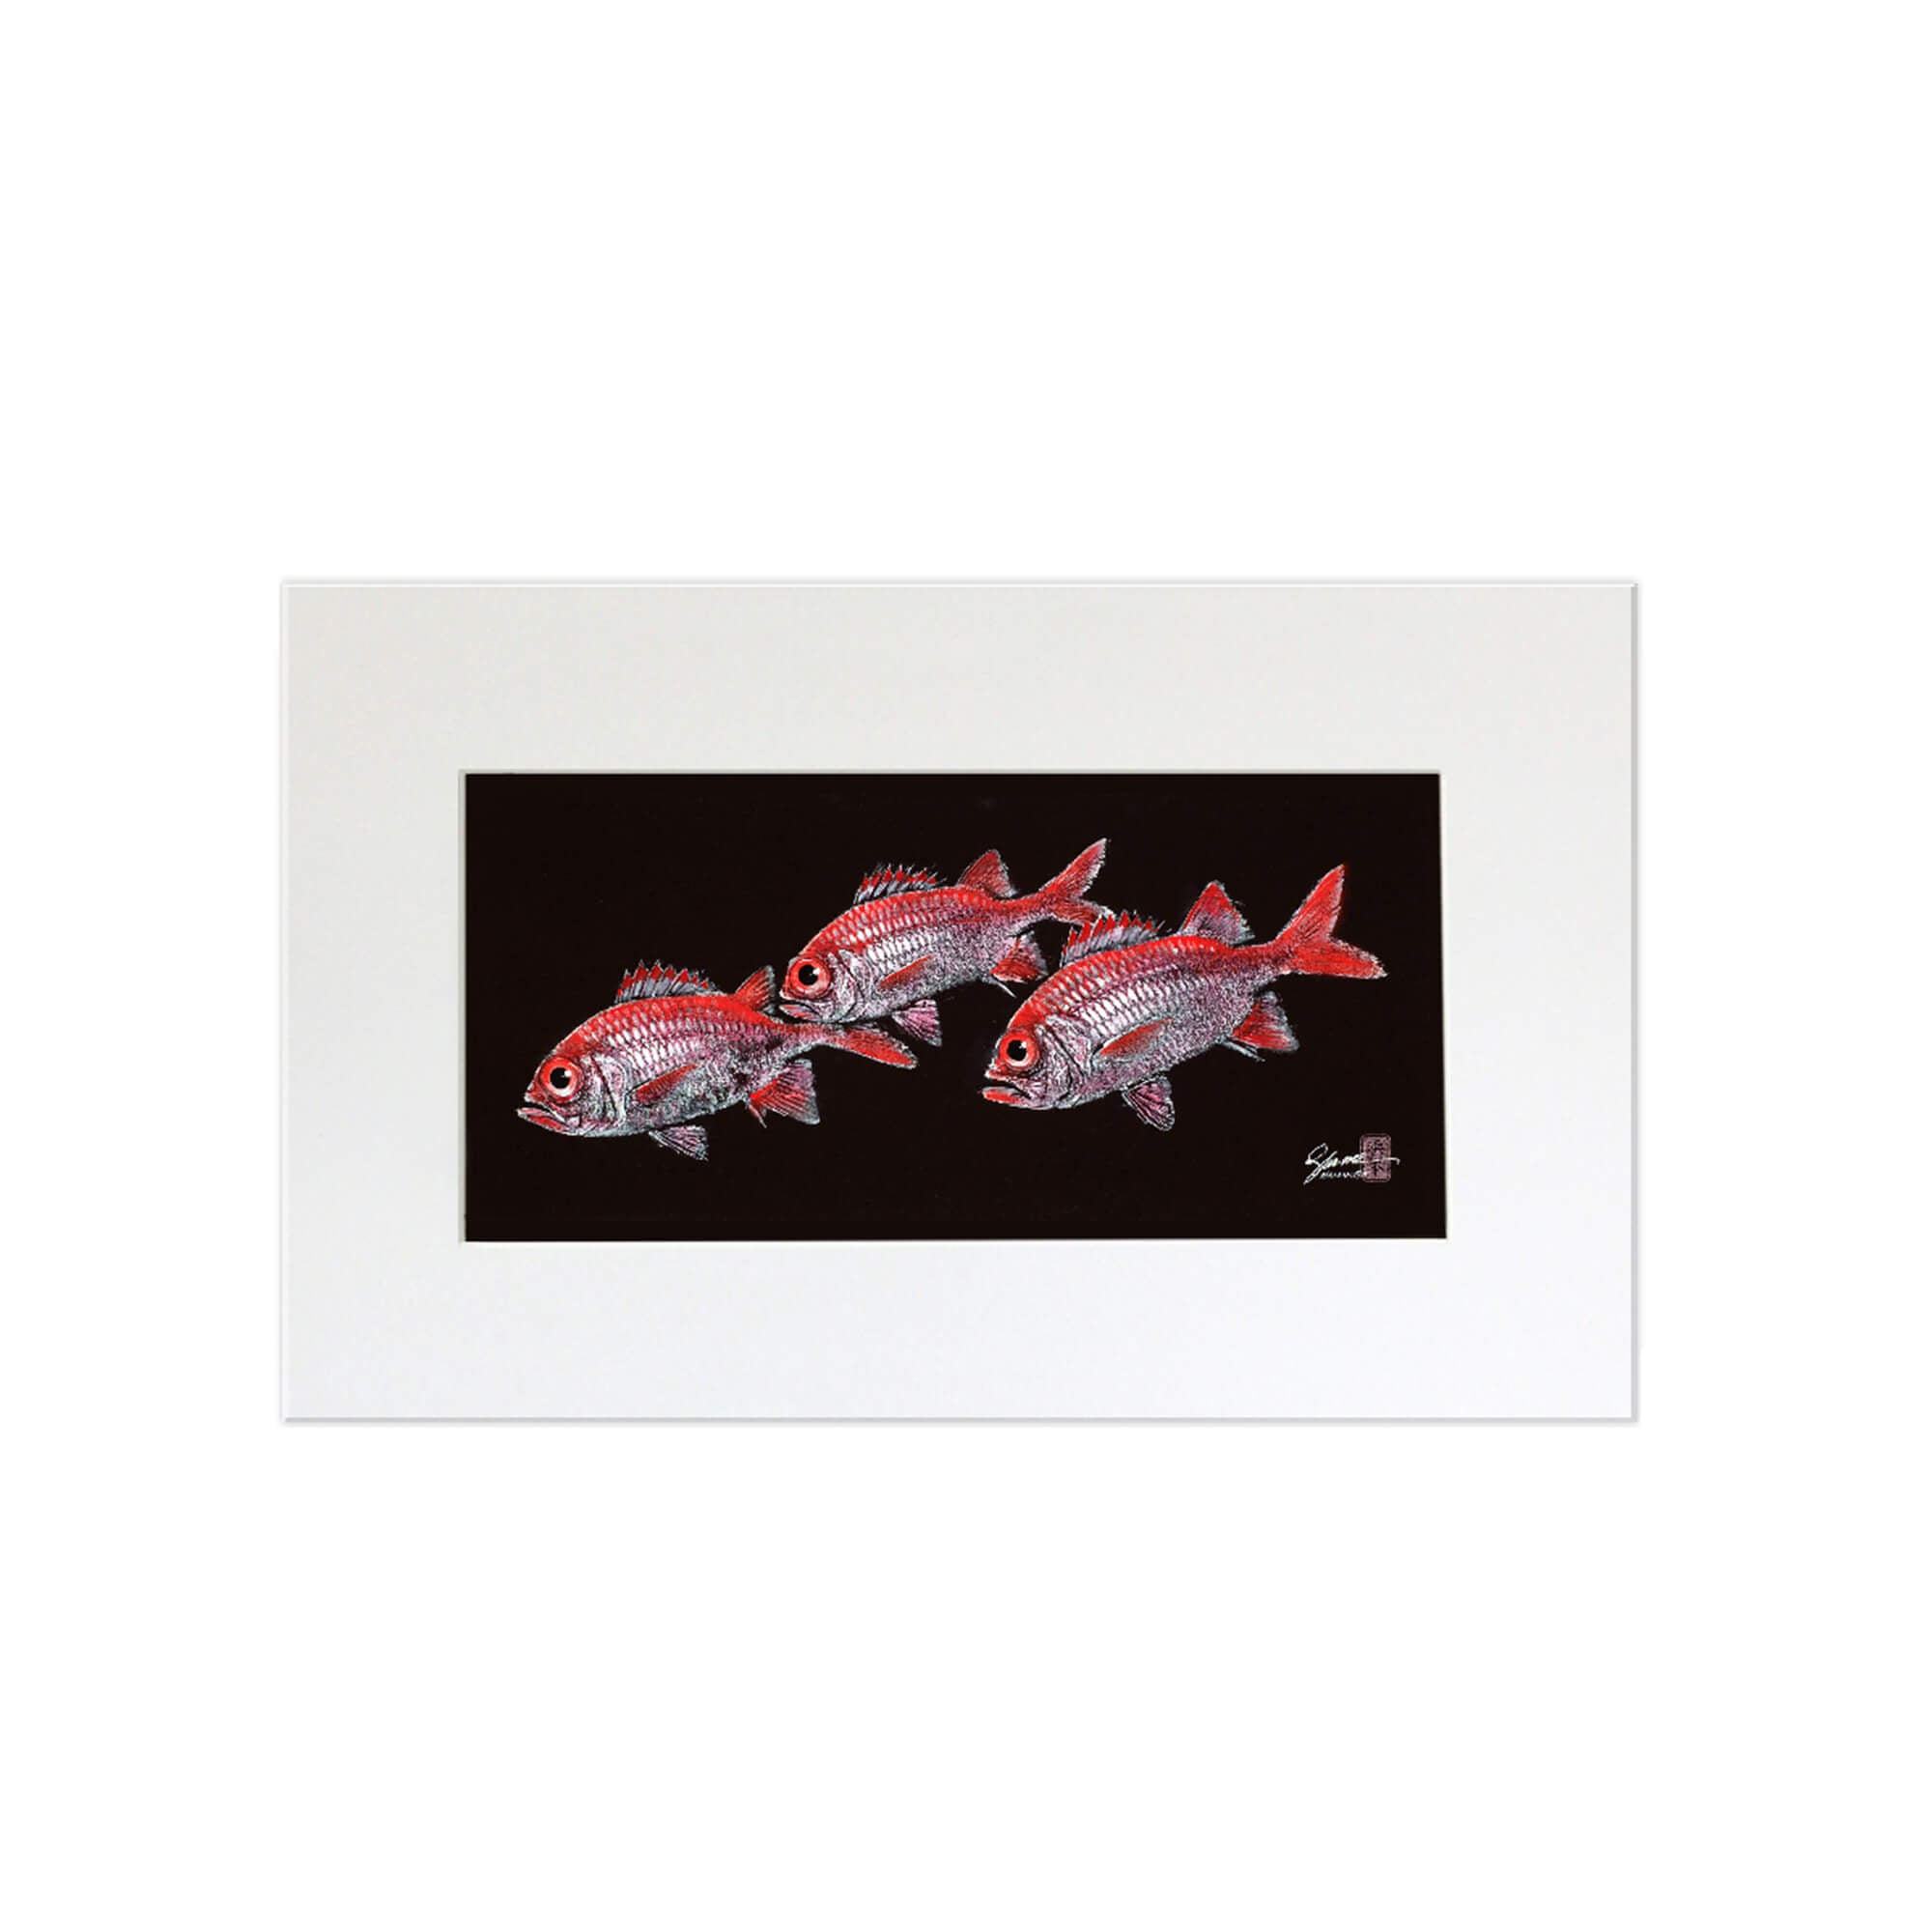 A matted print of Menpachi (also known as Flagtails and Soldierfish) by Hawaii gyotaku artist Shane Hamamoto